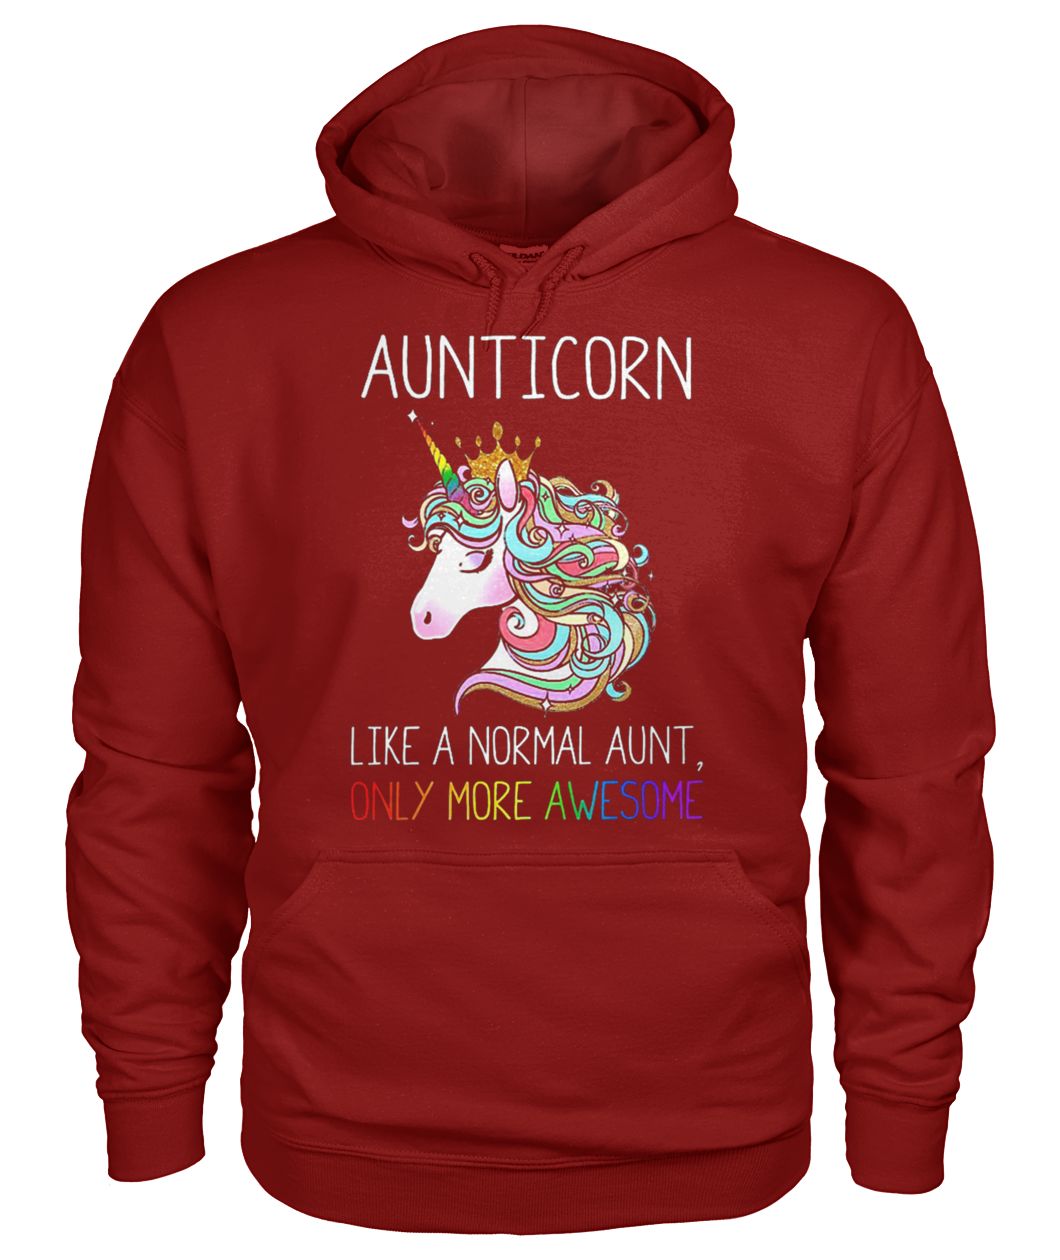 Aunticorn like a normal aunt only more awesome gildan hoodie